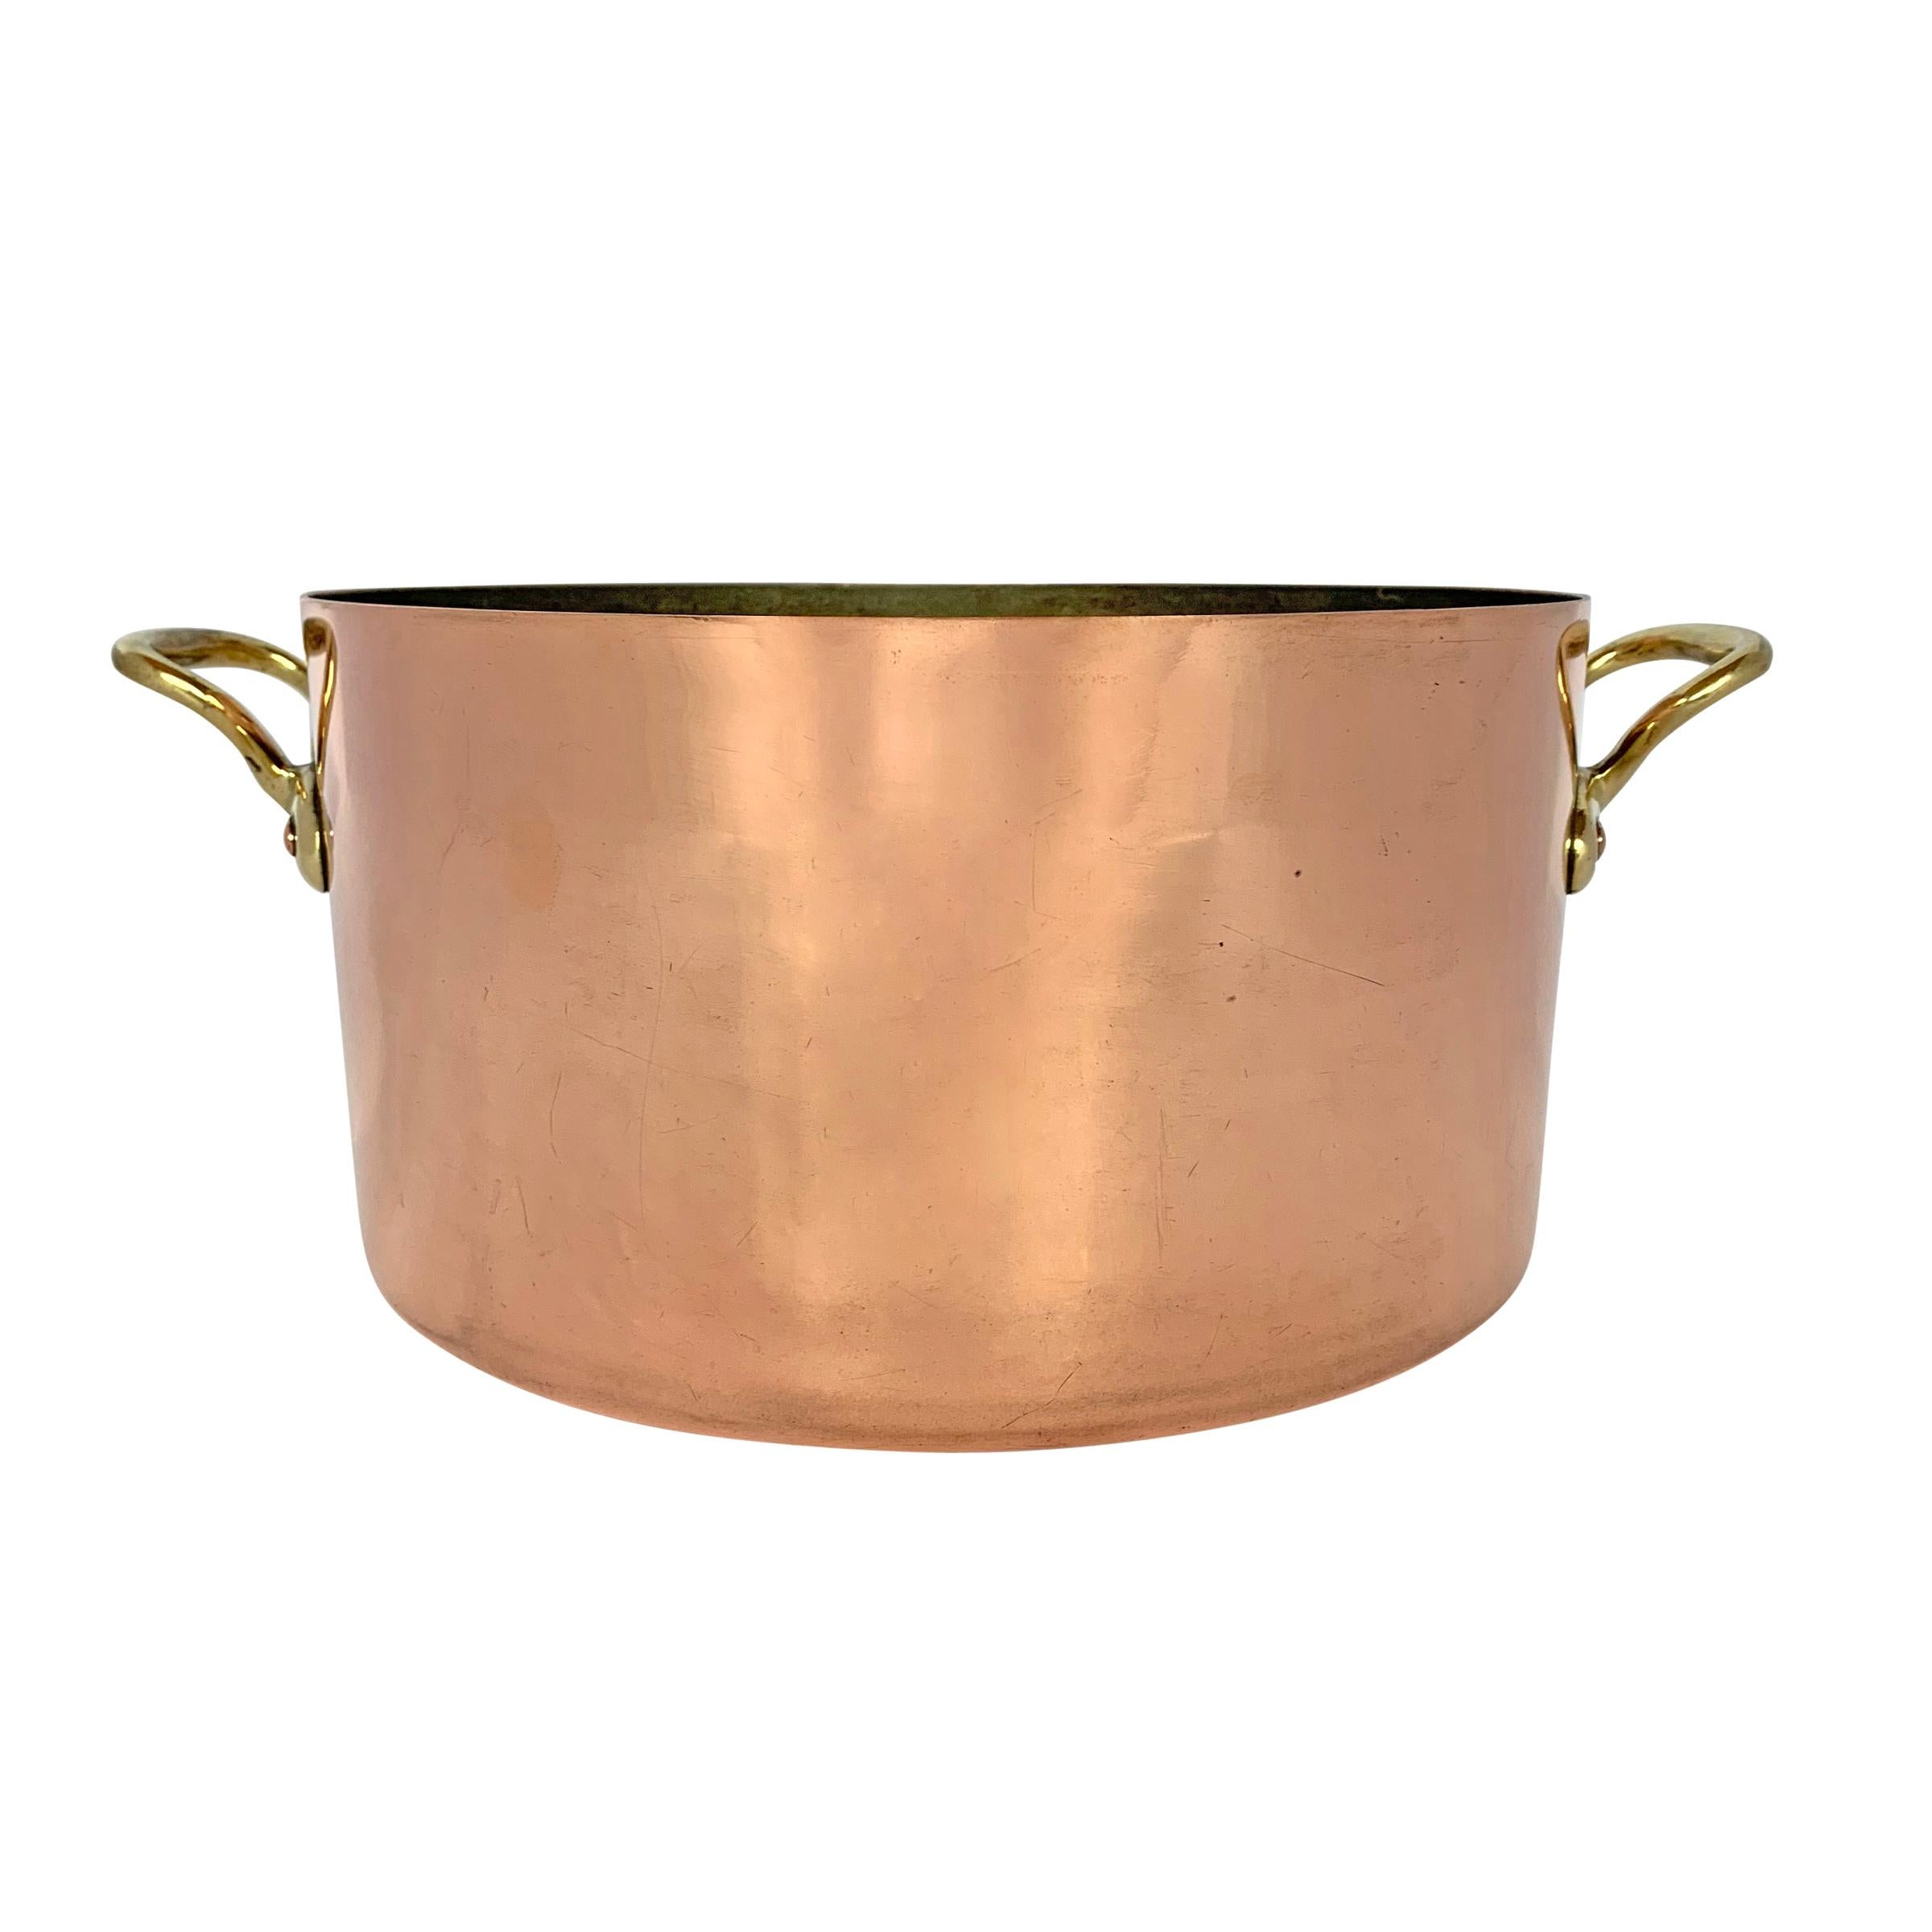 A wonderful 6.5 quart, 1.5 mm thick, early 20th century French copper pot with heavy bronze handles from the famous New York kitchenware boutique, Bazar Français. Charles Ruegger opened his kitchenware shop, Bazar Français, in 1874 and moved the